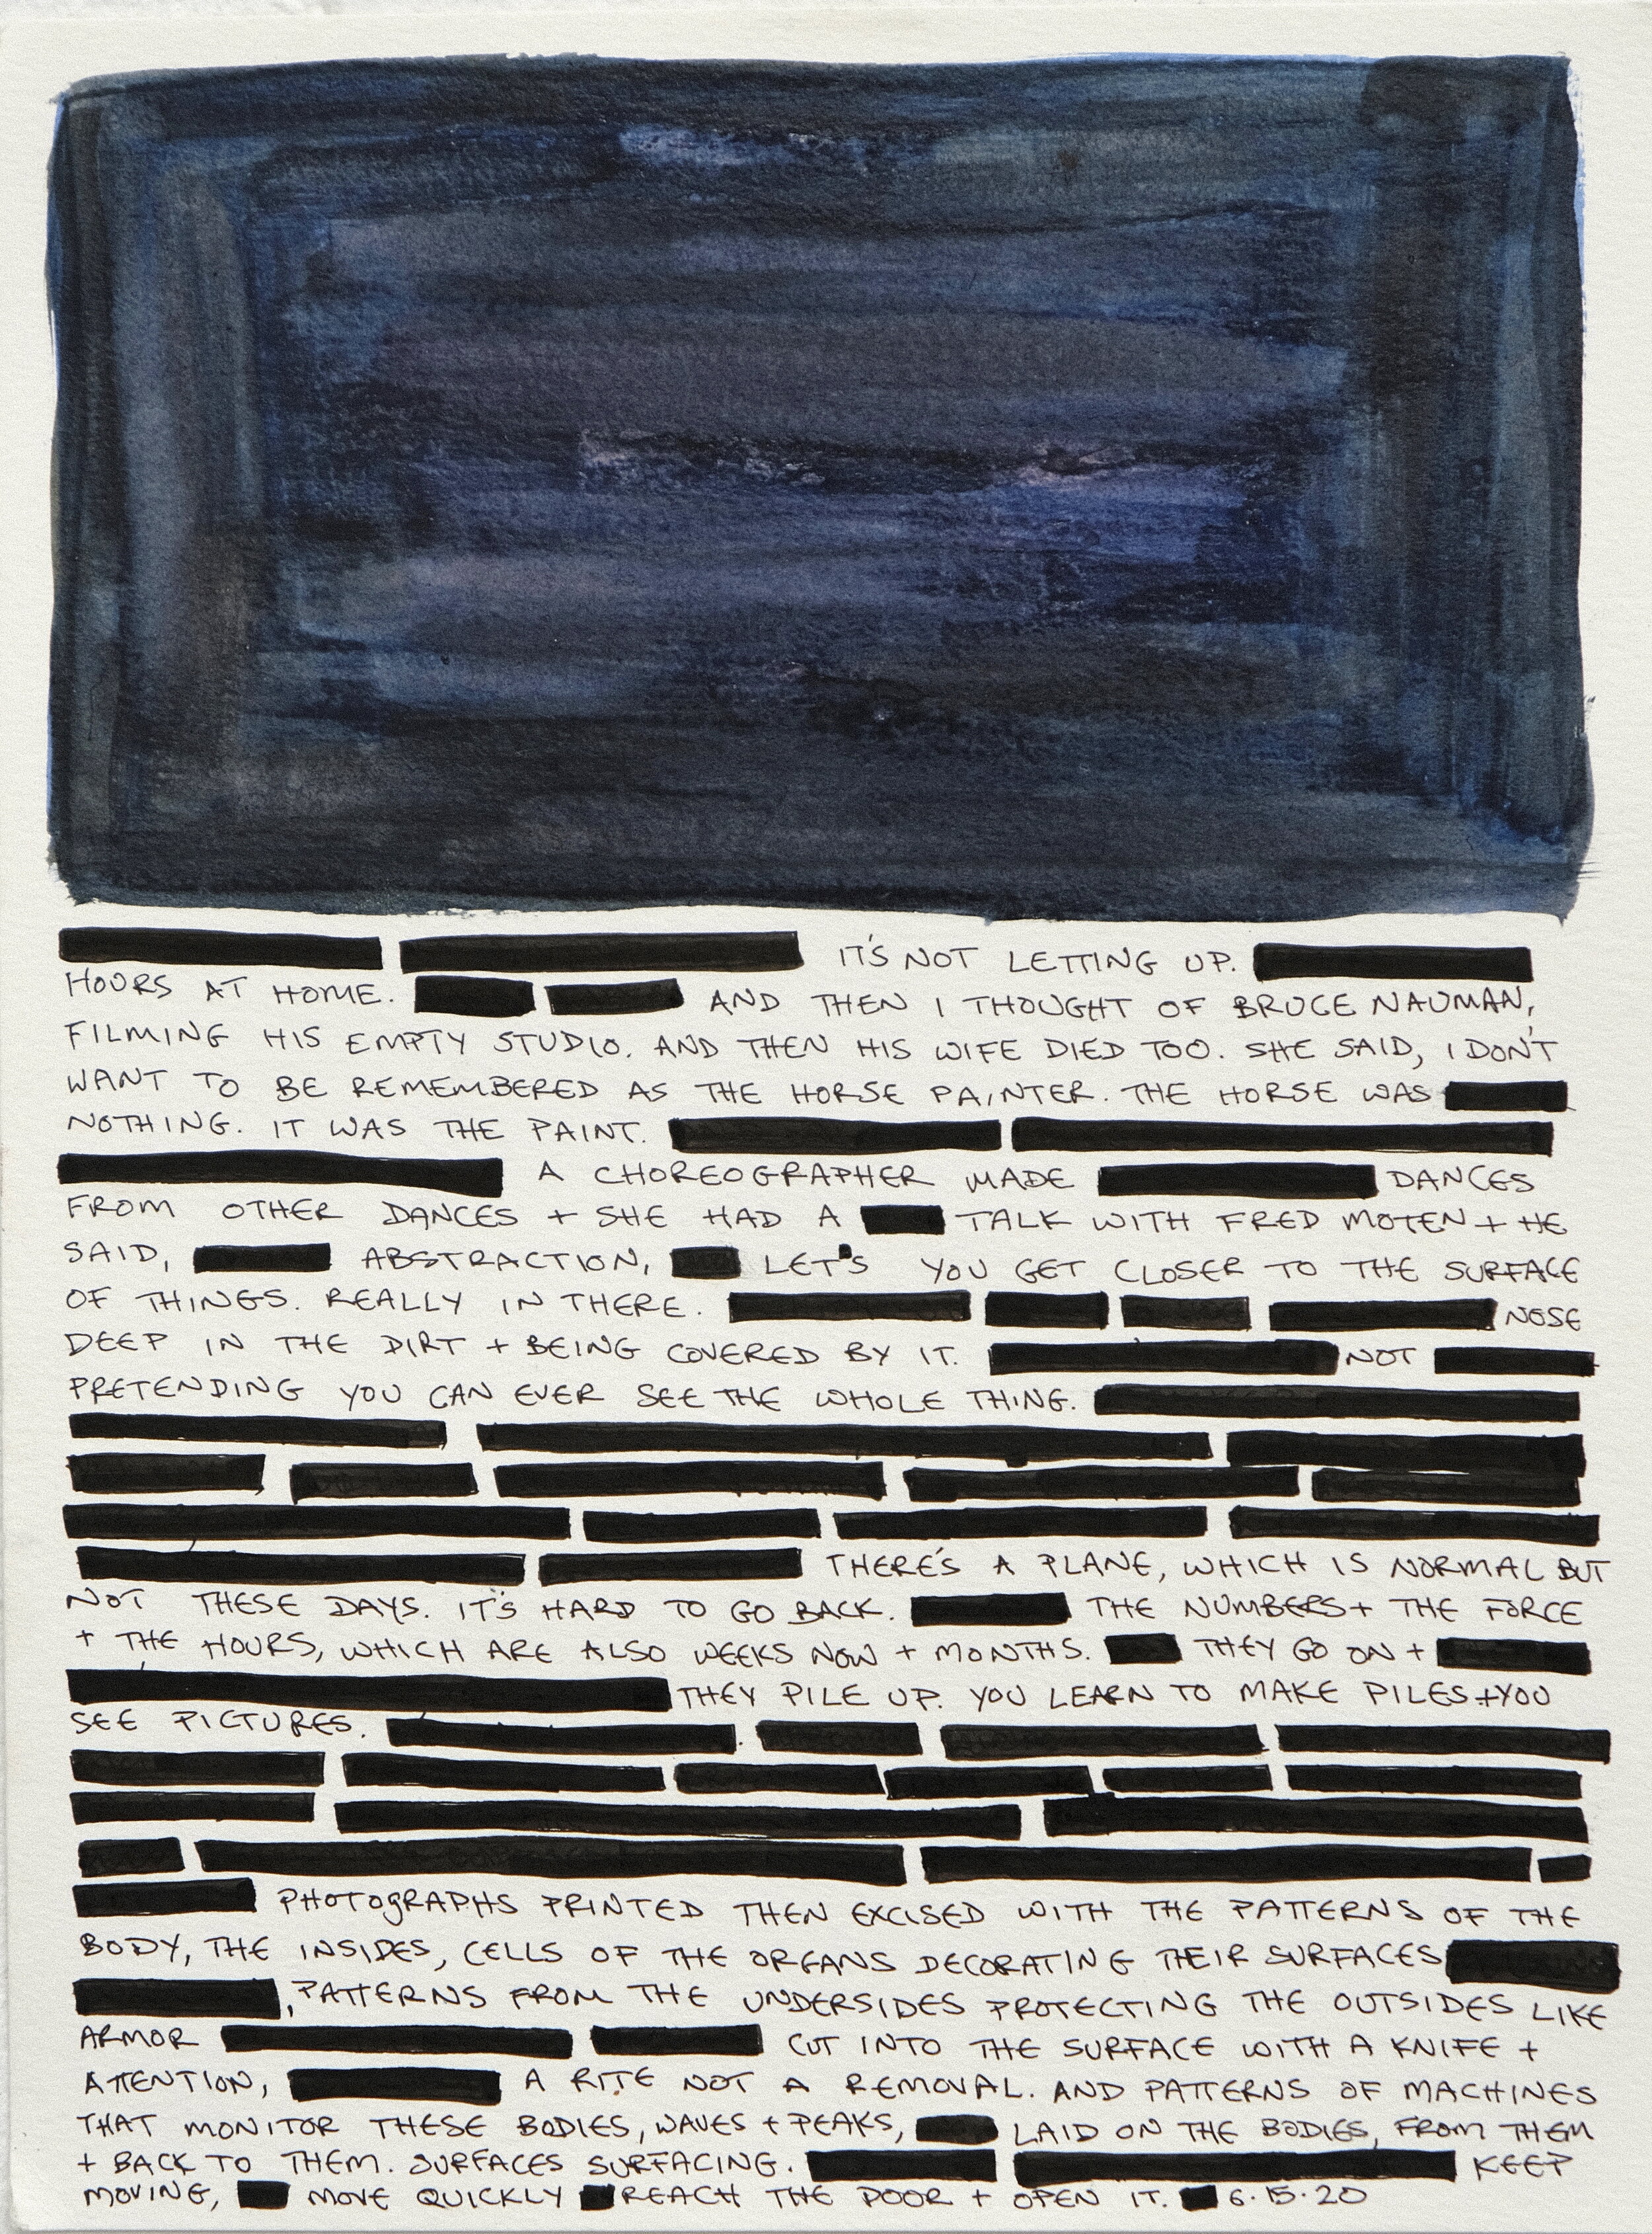 039_The Hose Was Nothing_REDACTIONS 2020.JPG